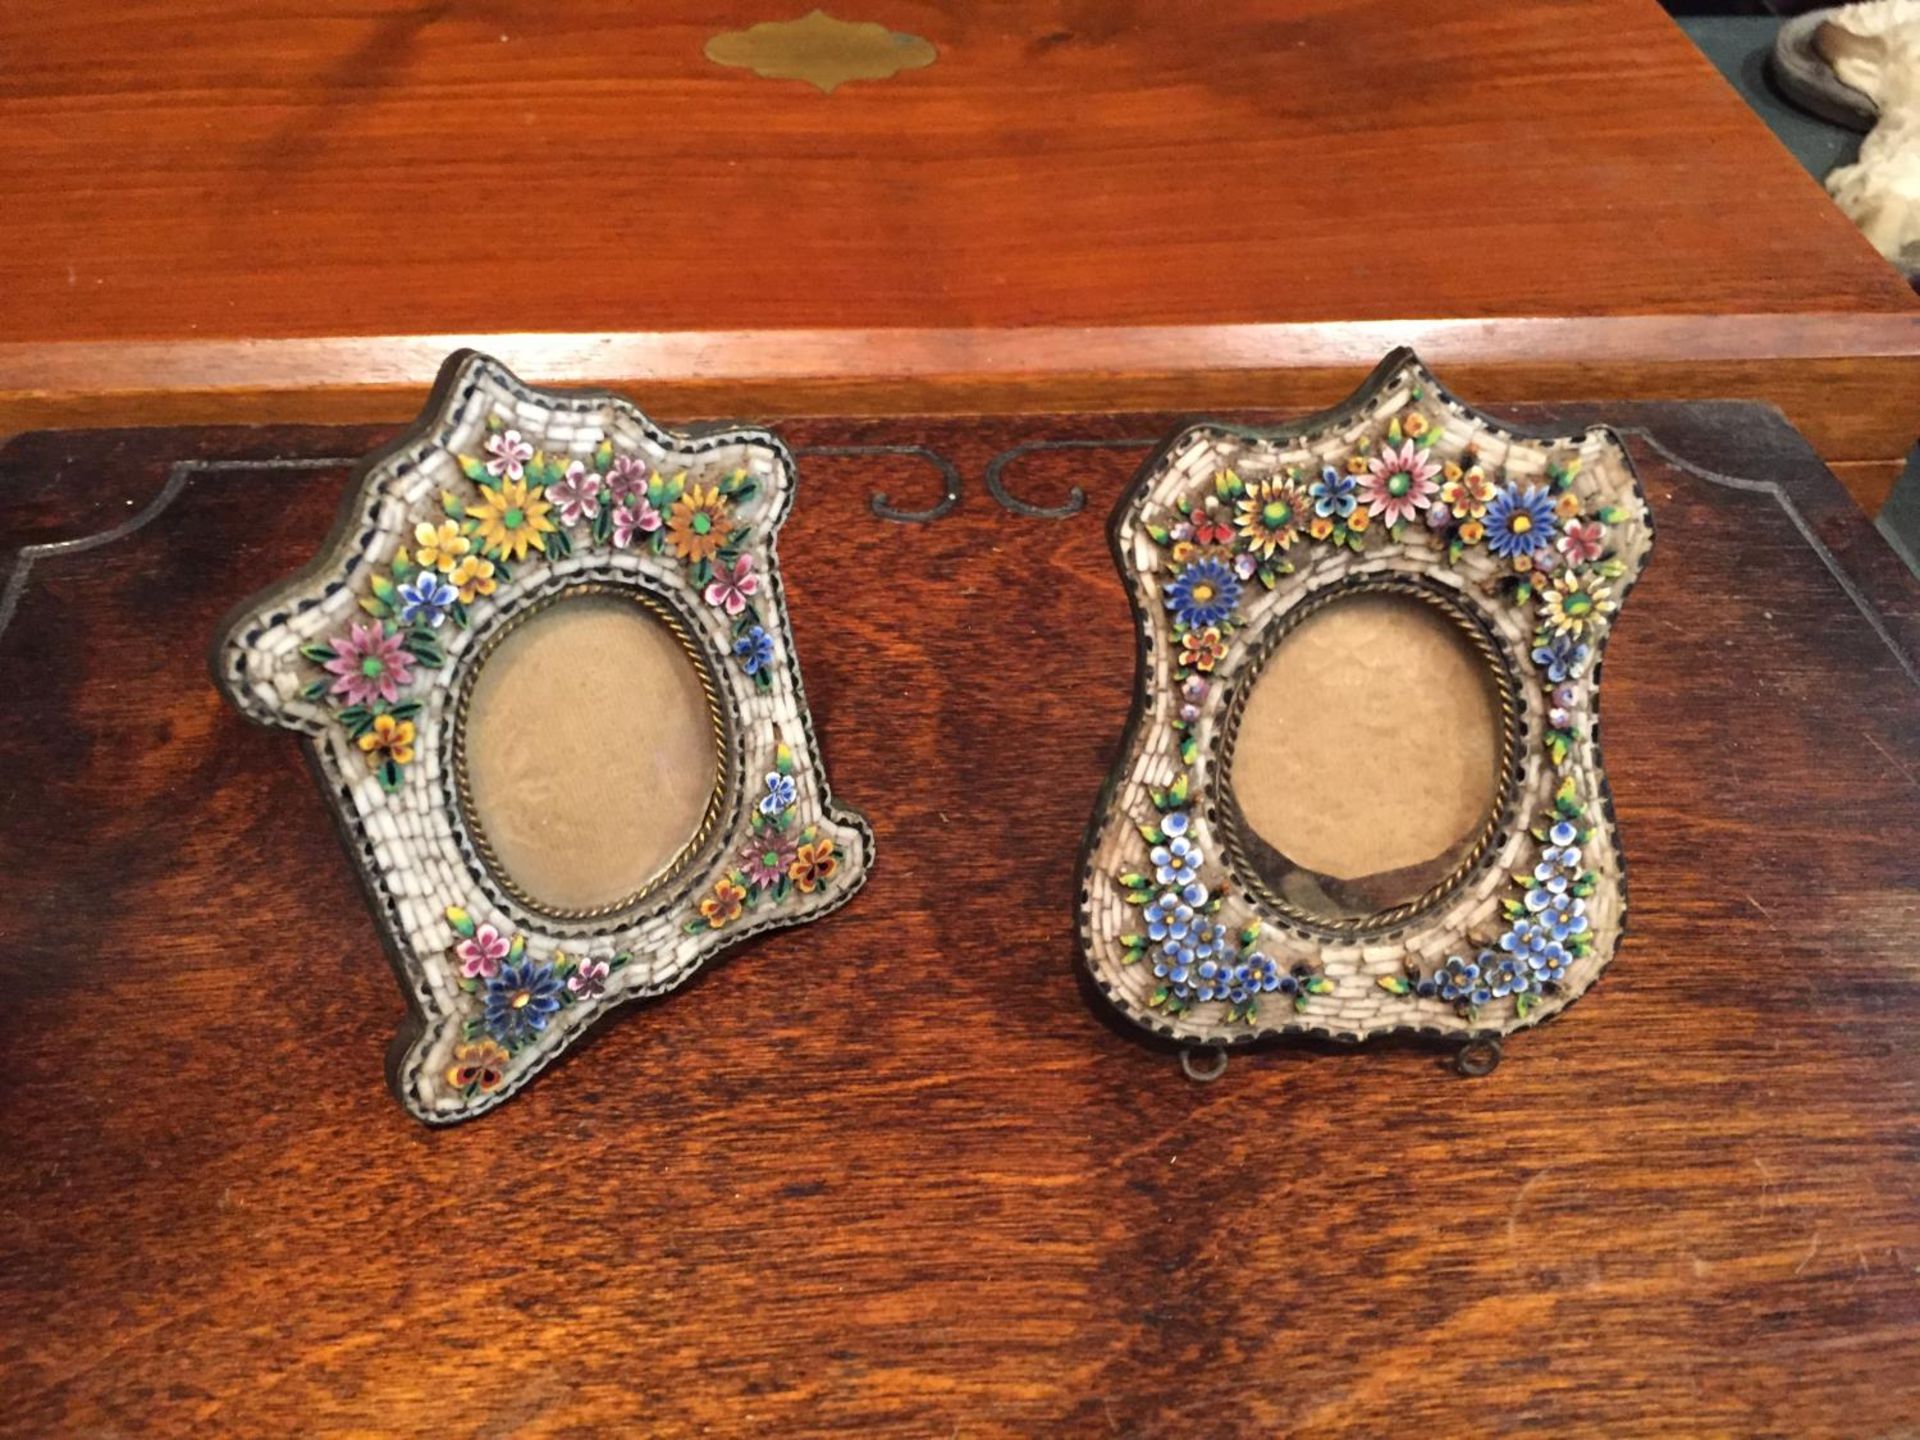 THREE WOODEN BOXES OF VARIOUS SIZES AND TWO MINIATURE MOSAIC FRAMES - Image 12 of 12